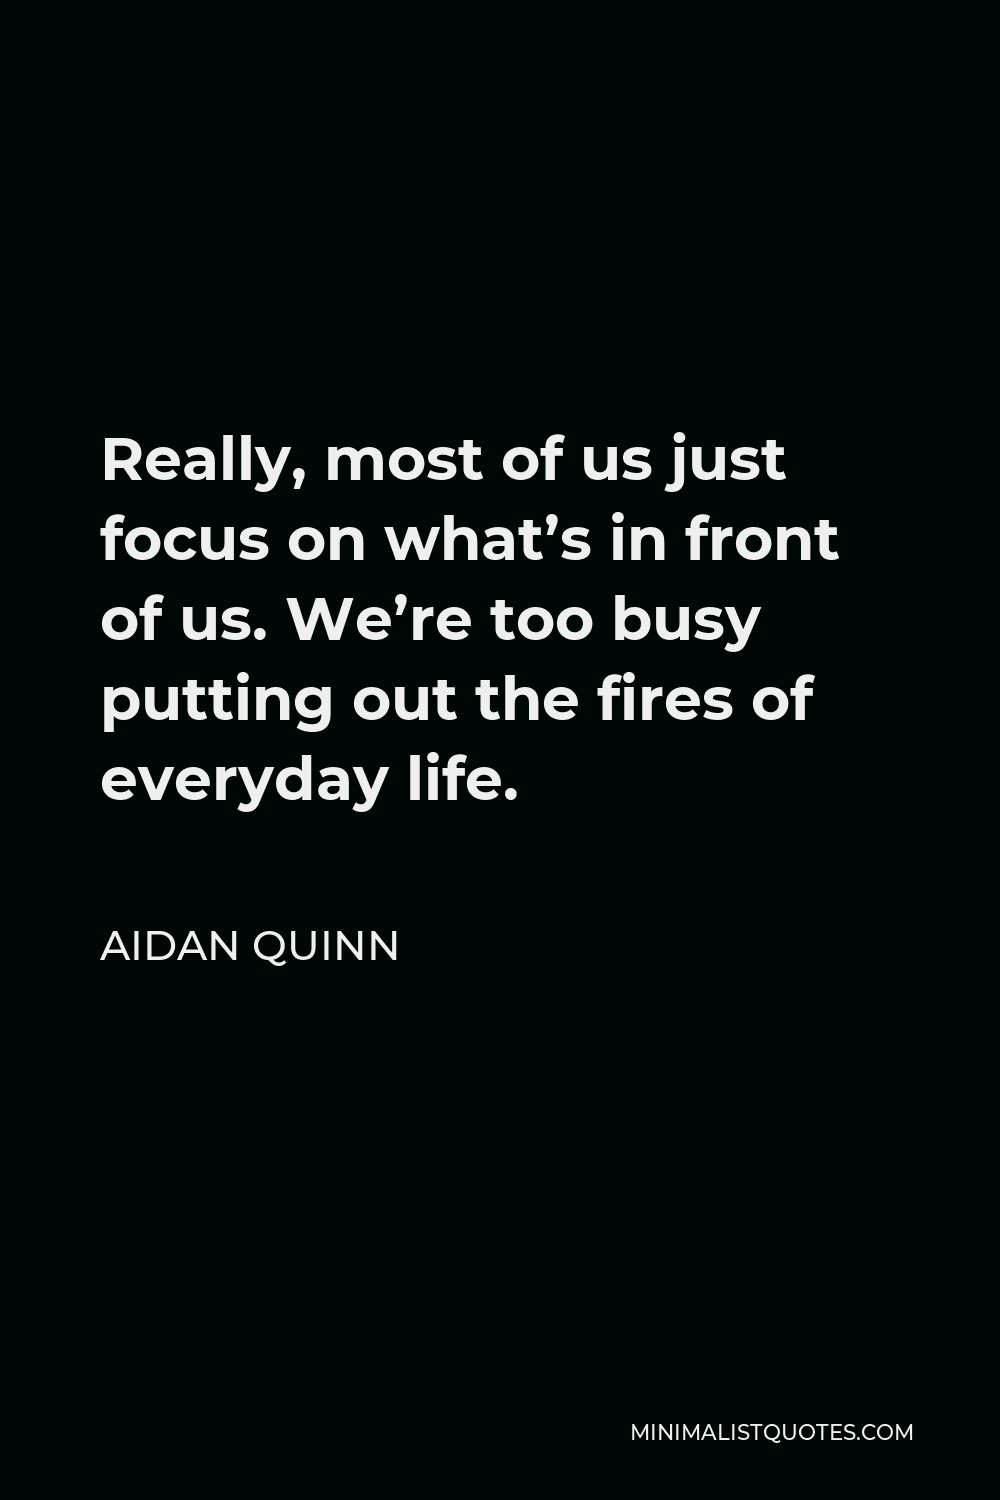 Aidan Quinn Quote - Really, most of us just focus on what’s in front of us. We’re too busy putting out the fires of everyday life.